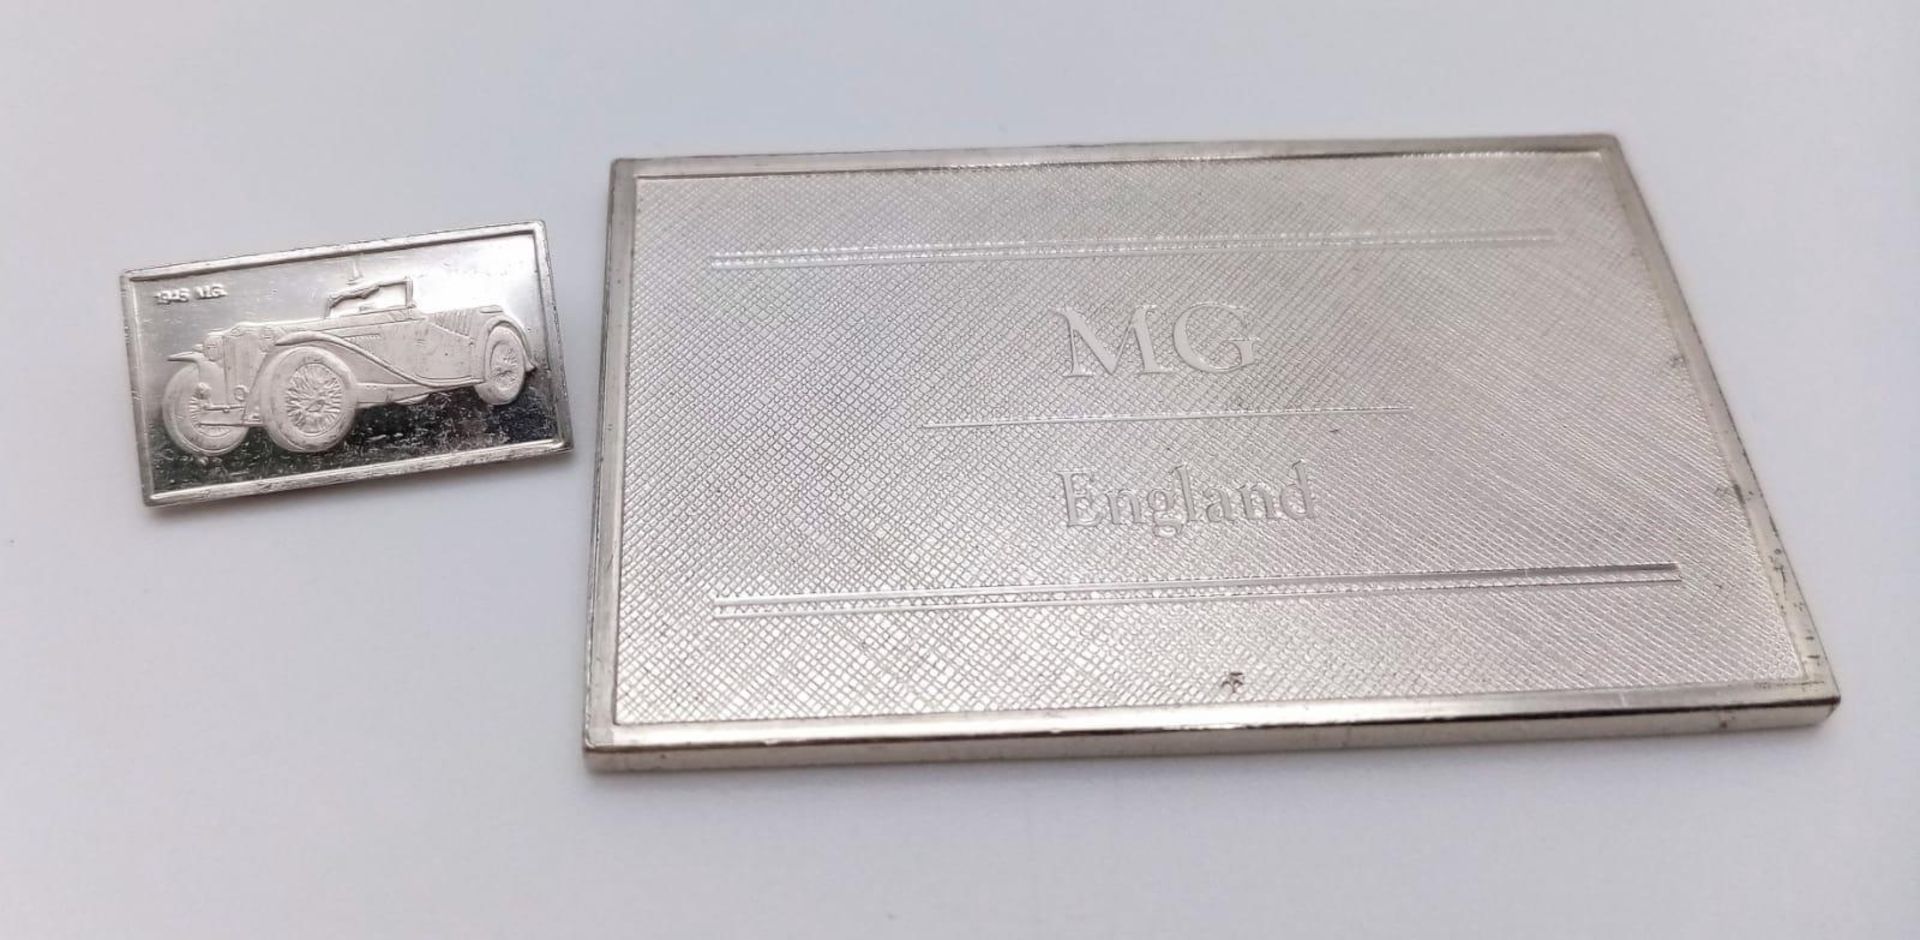 2 X STERLING SILVER AND ENAMEL MG CAR LOGO MANUFACTURER PLAQUES, MADE IN UNITED KINGDOM ENGLAND, - Bild 2 aus 4